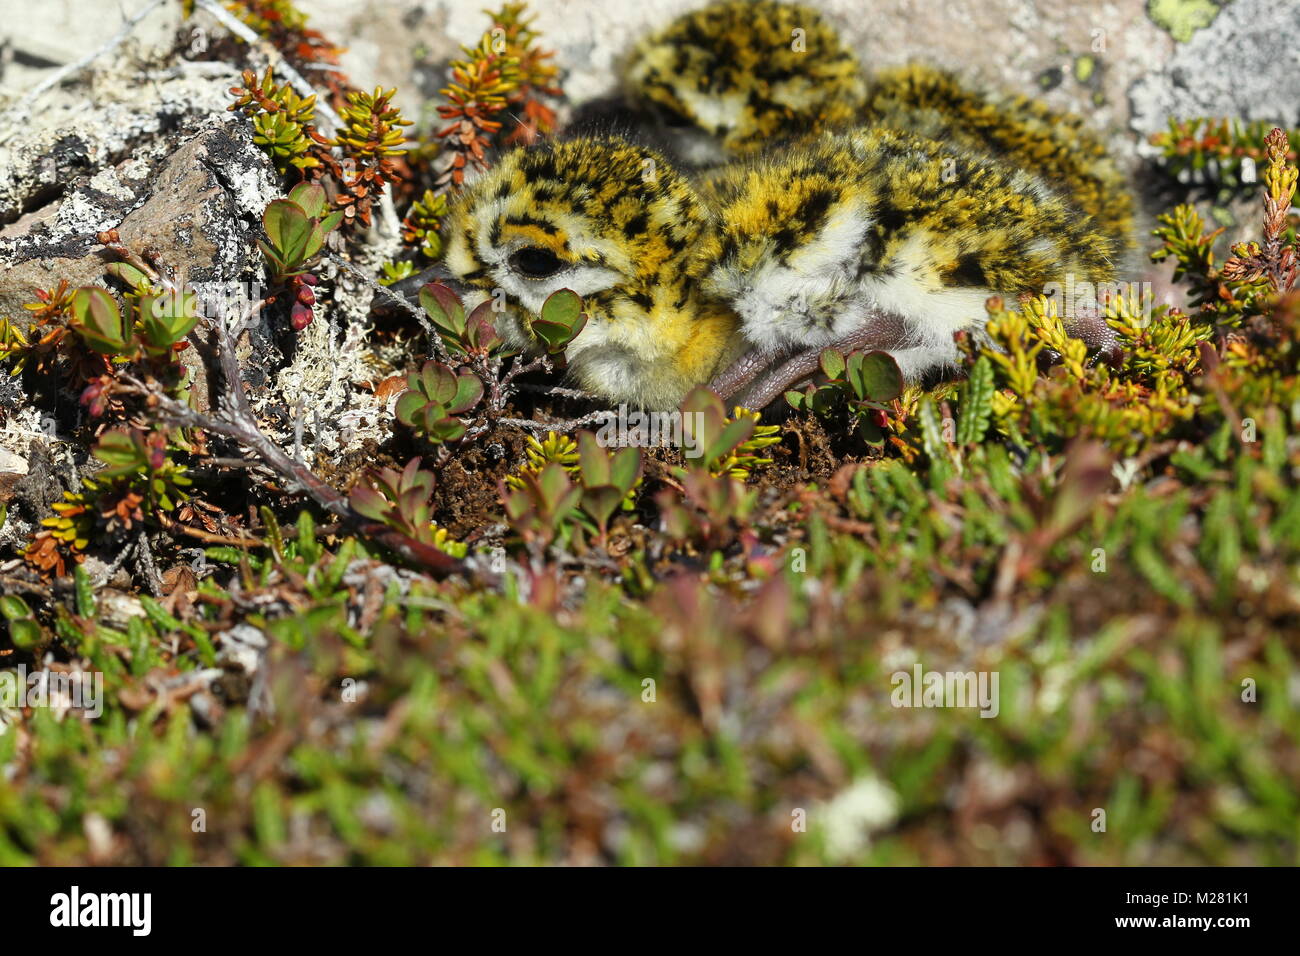 European golden plover (Pluvialis apricaria), a few days old chick, camouflaged between groundcovers in the tundra, Norway Stock Photo